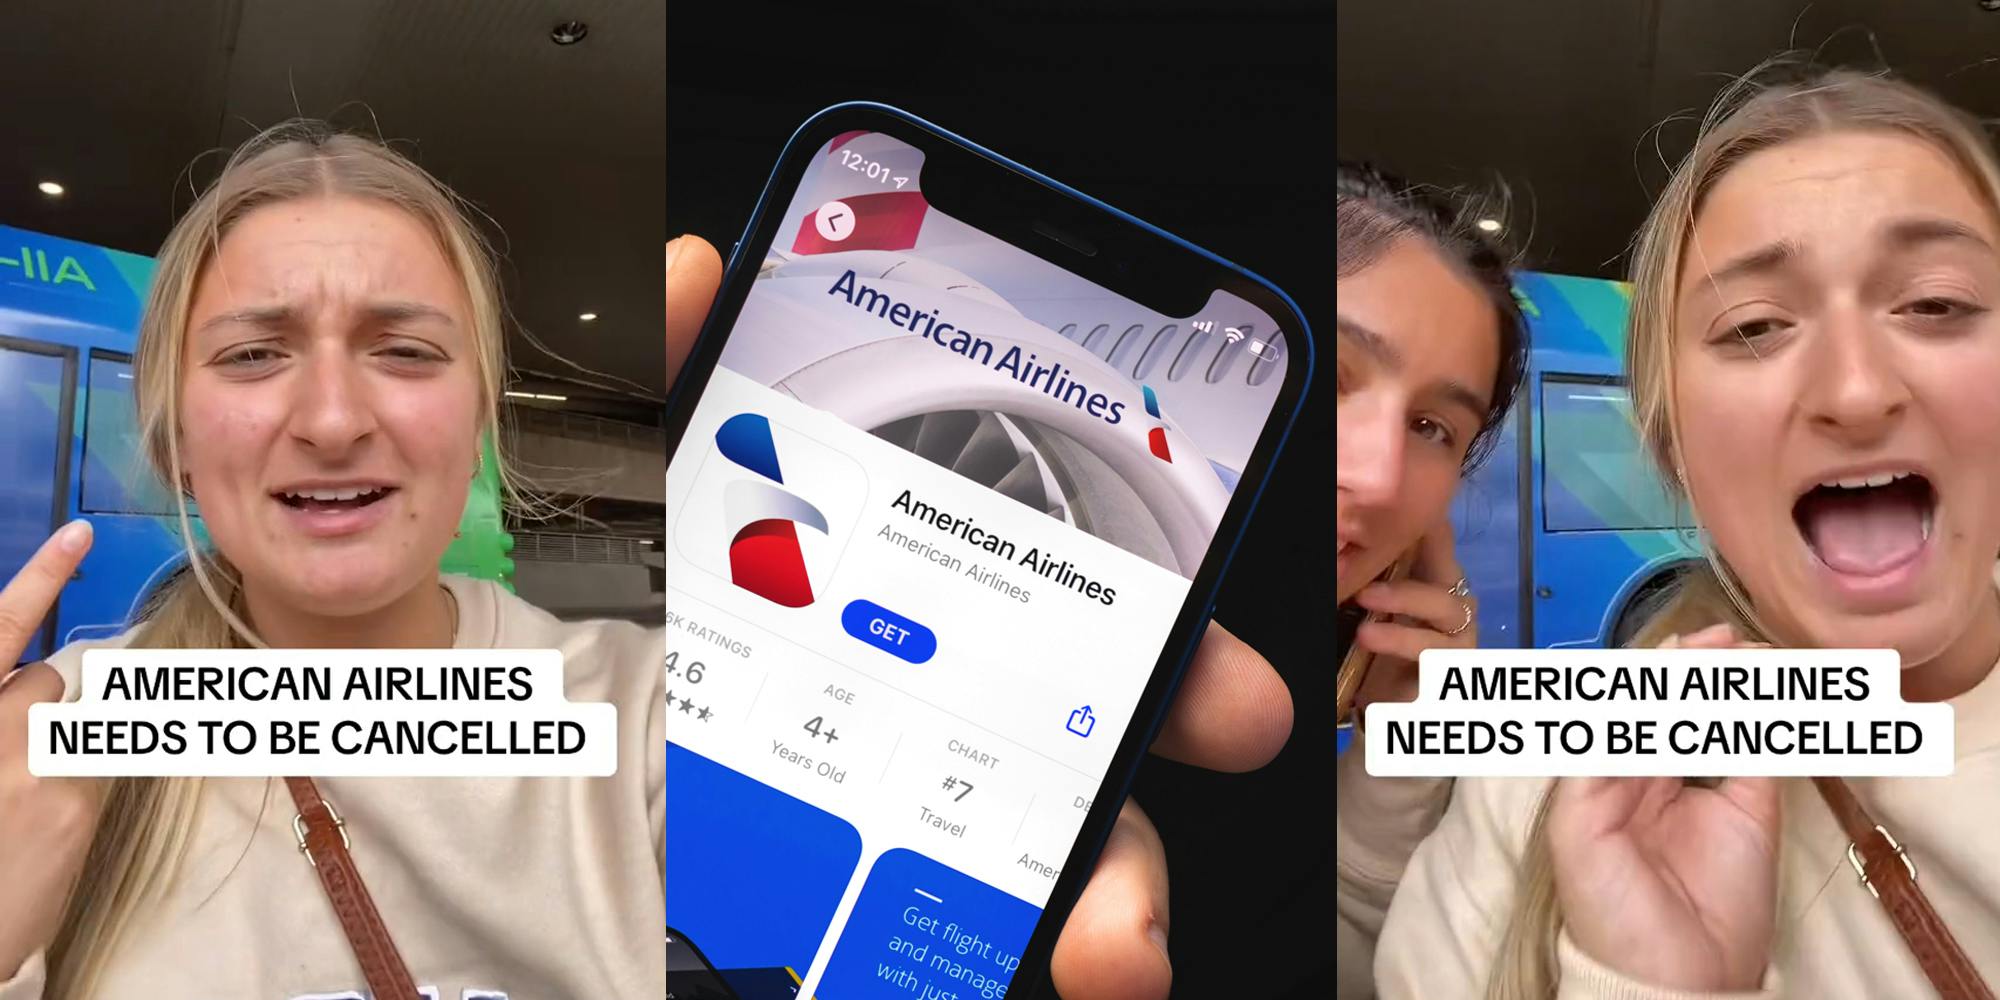 American Airlines customer speaking with caption 'AMERICAN AIRLINES NEEDS TO BE CANCELLED' (l) hand holding phone with American Airlines app on screen in front of dark background (c) American Airlines customers speaking with caption 'AMERICAN AIRLINES NEEDS TO BE CANCELLED' (r)